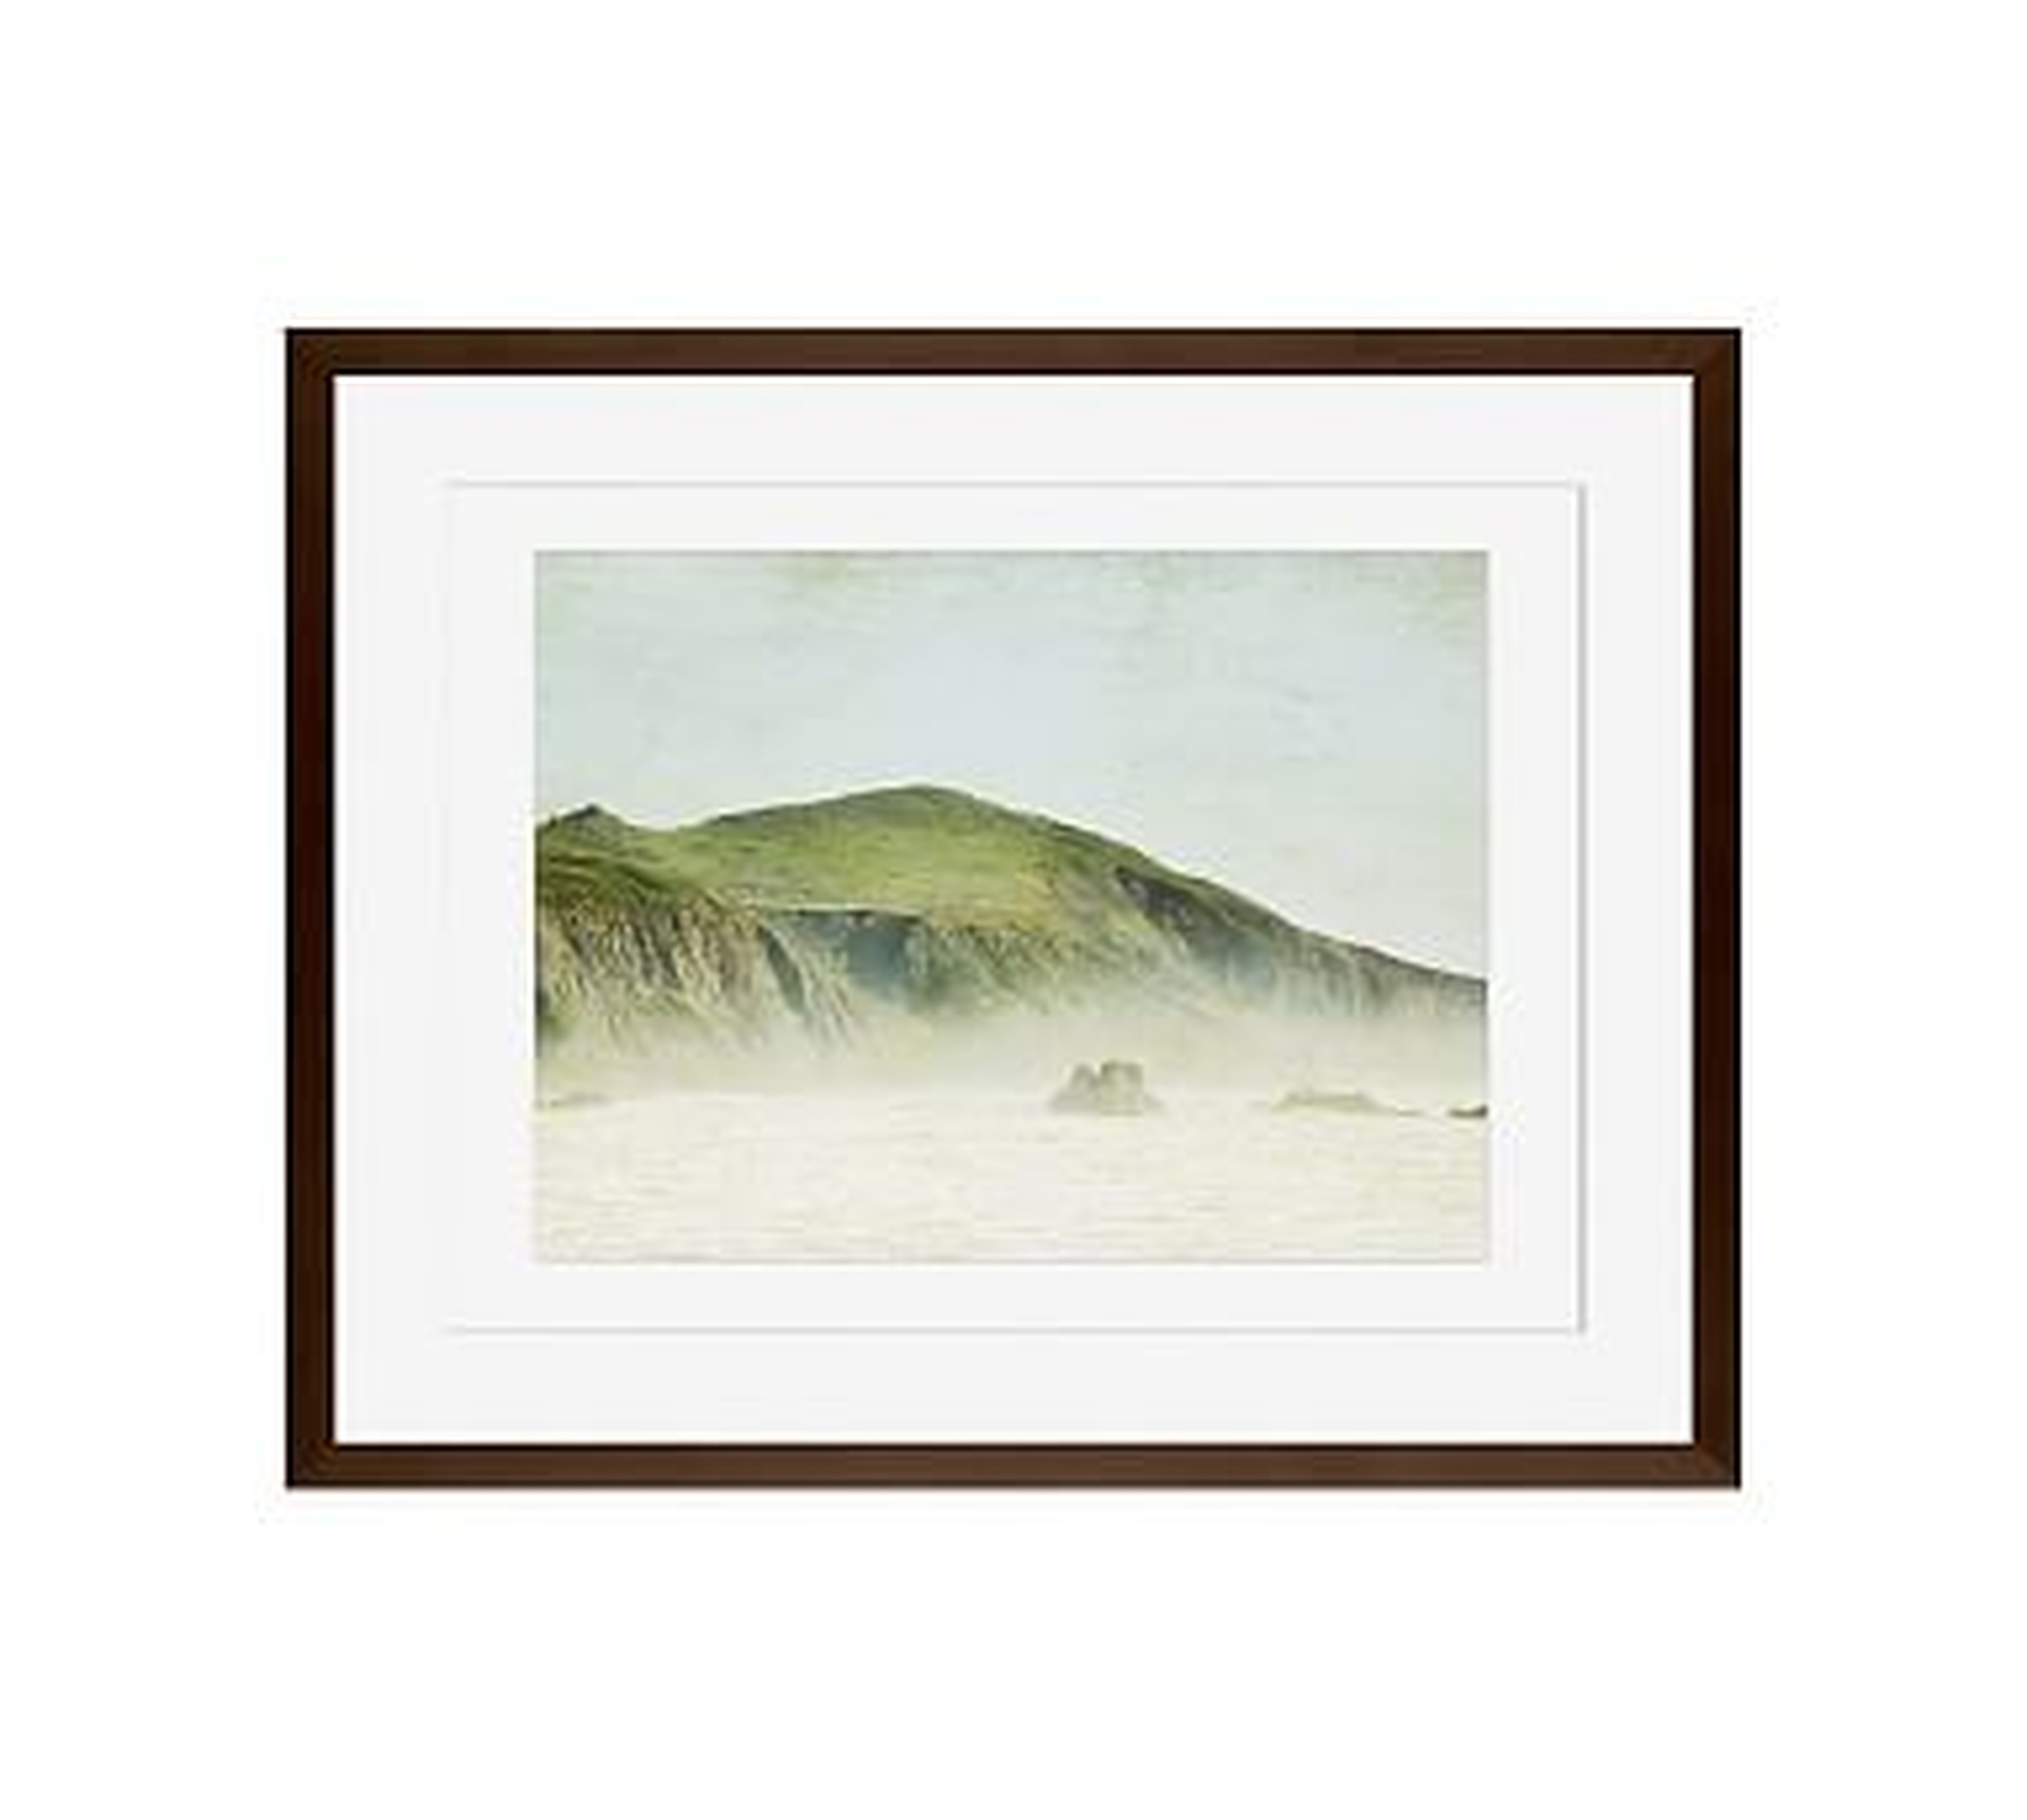 Green and Mist Framed Print by Lupen Grainne, 20 x 16", Wood Gallery Frame, Espresso, Mat - Pottery Barn